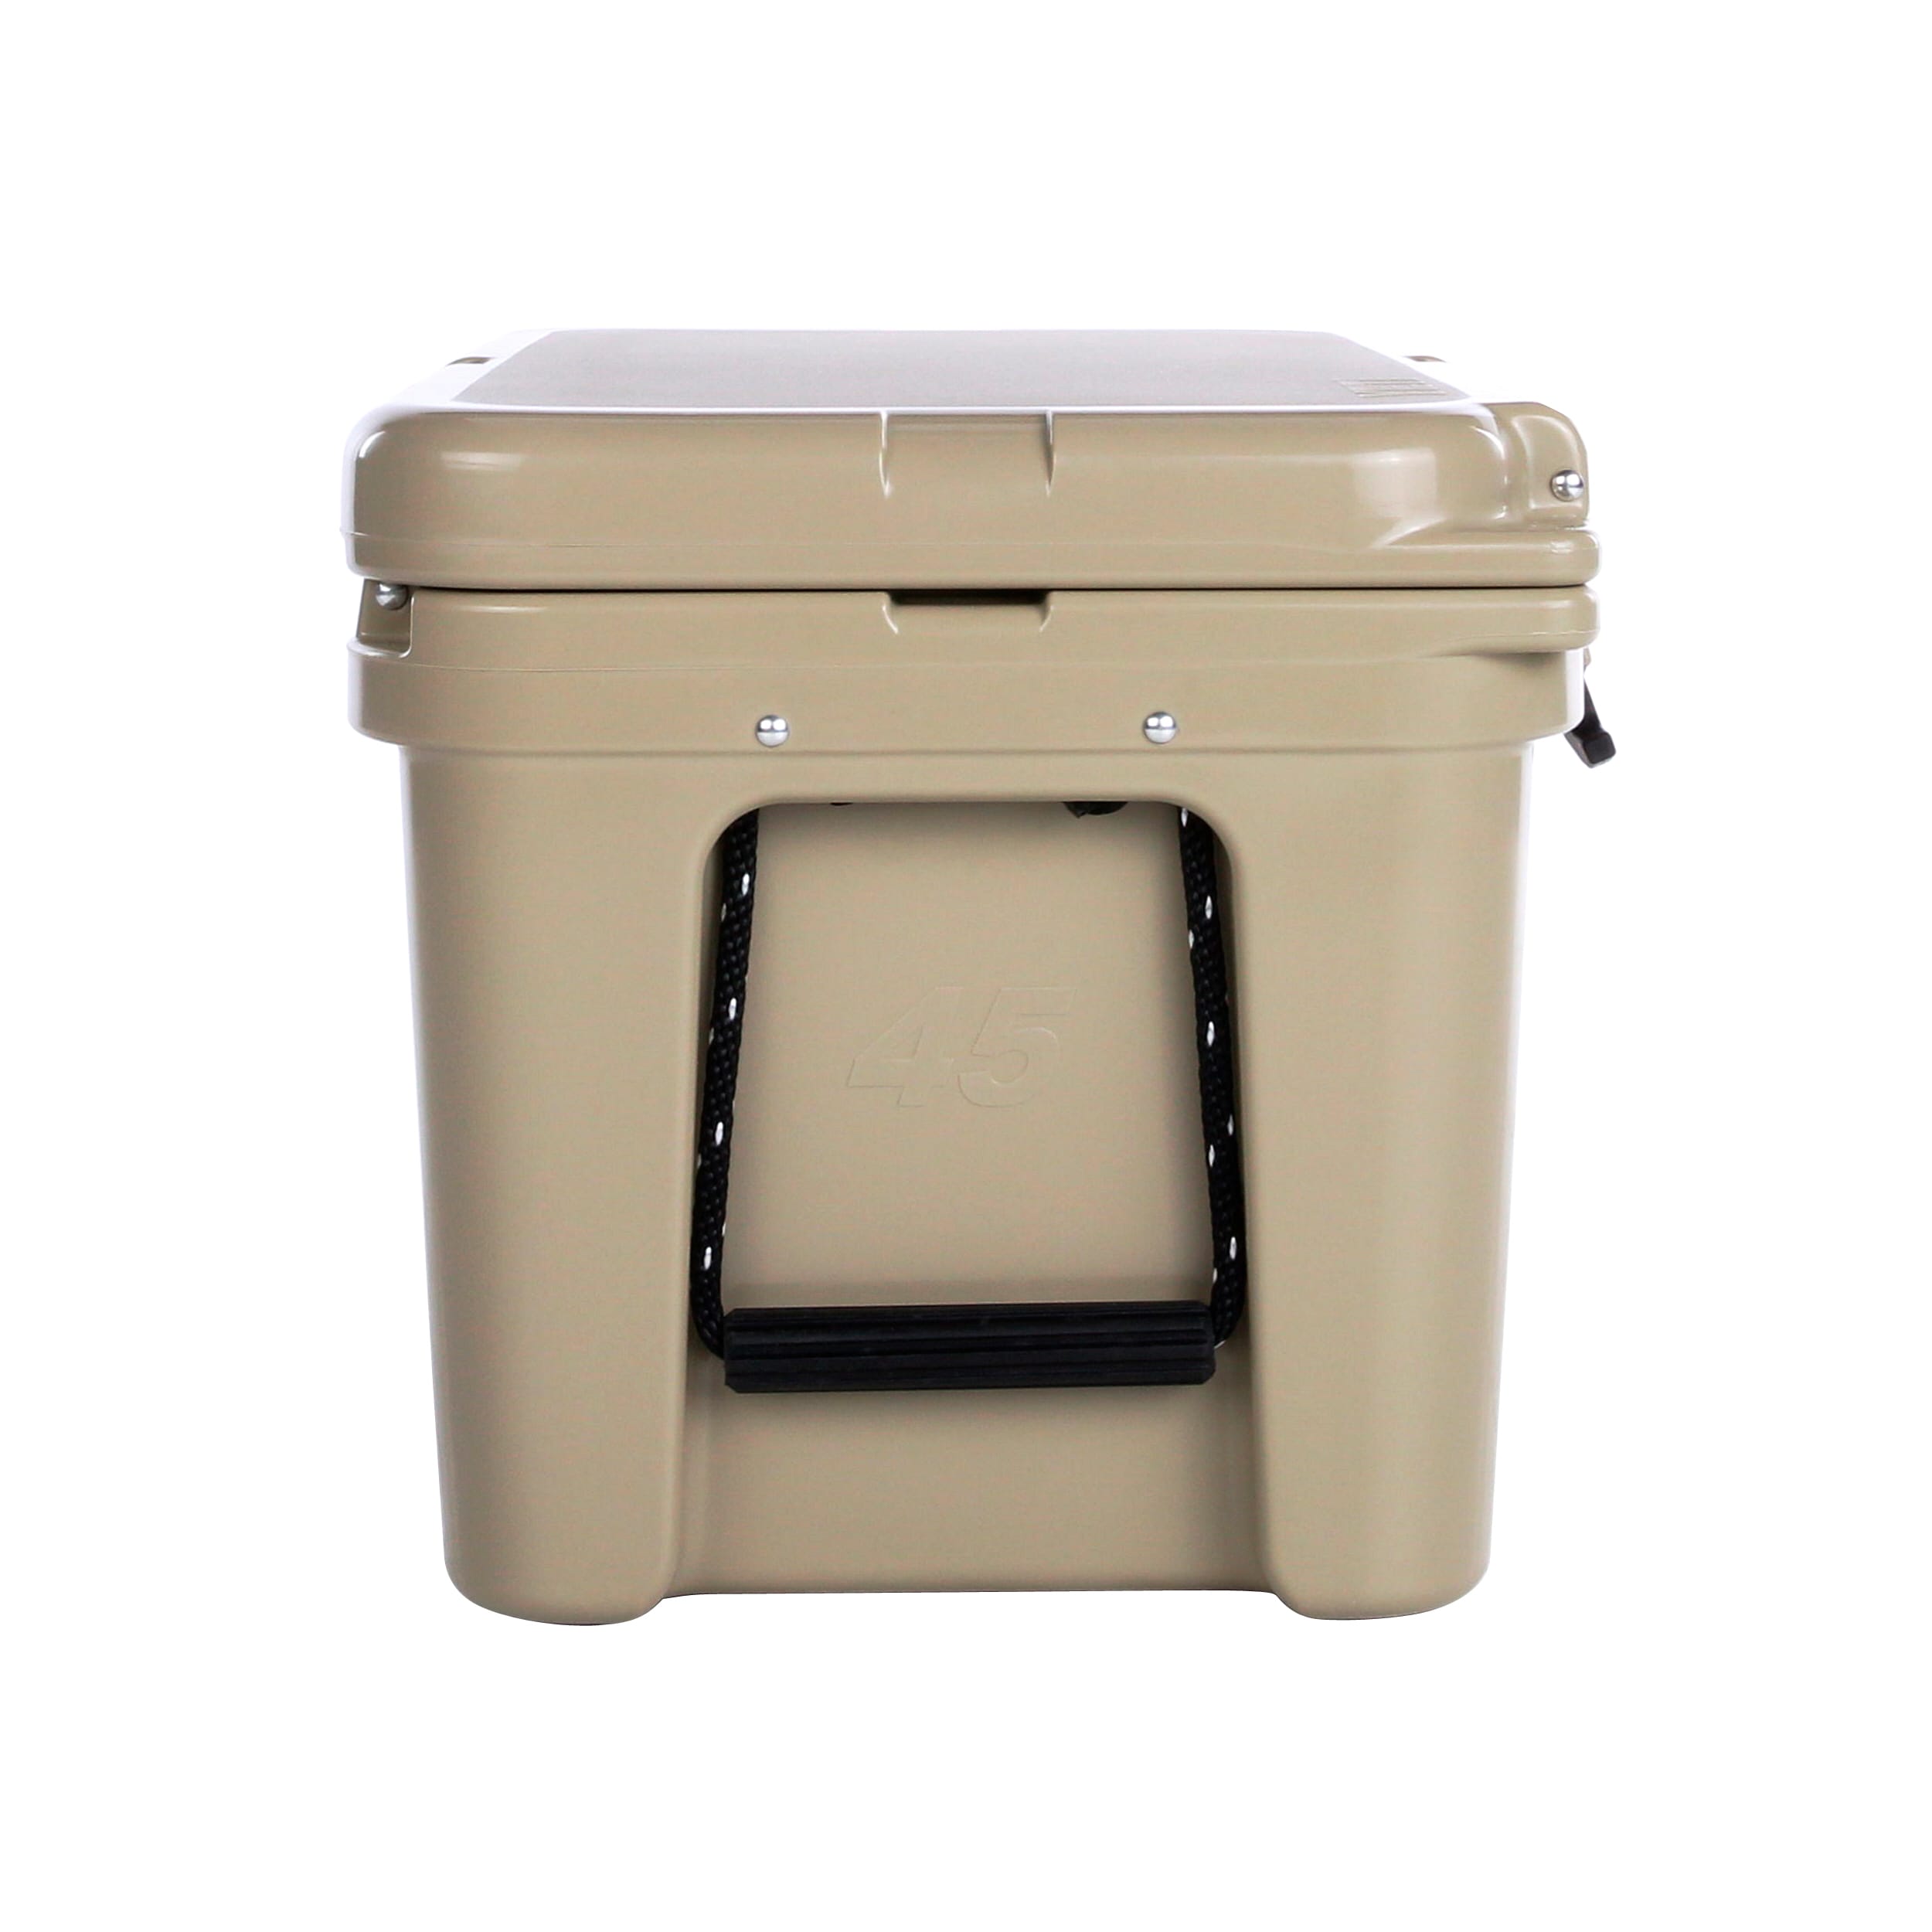 YETI Tundra 45 Insulated Chest Cooler, Tan at Lowes.com